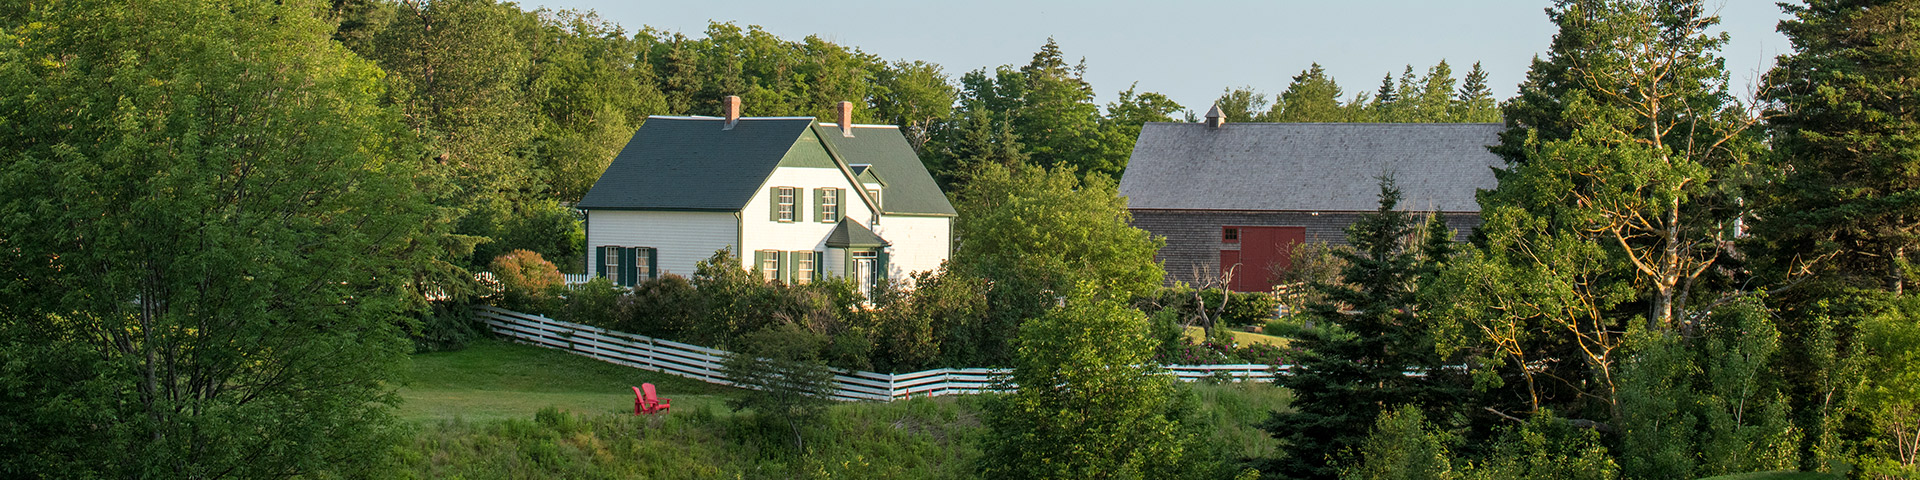 Plan your visit to Green Gables National Historic Site